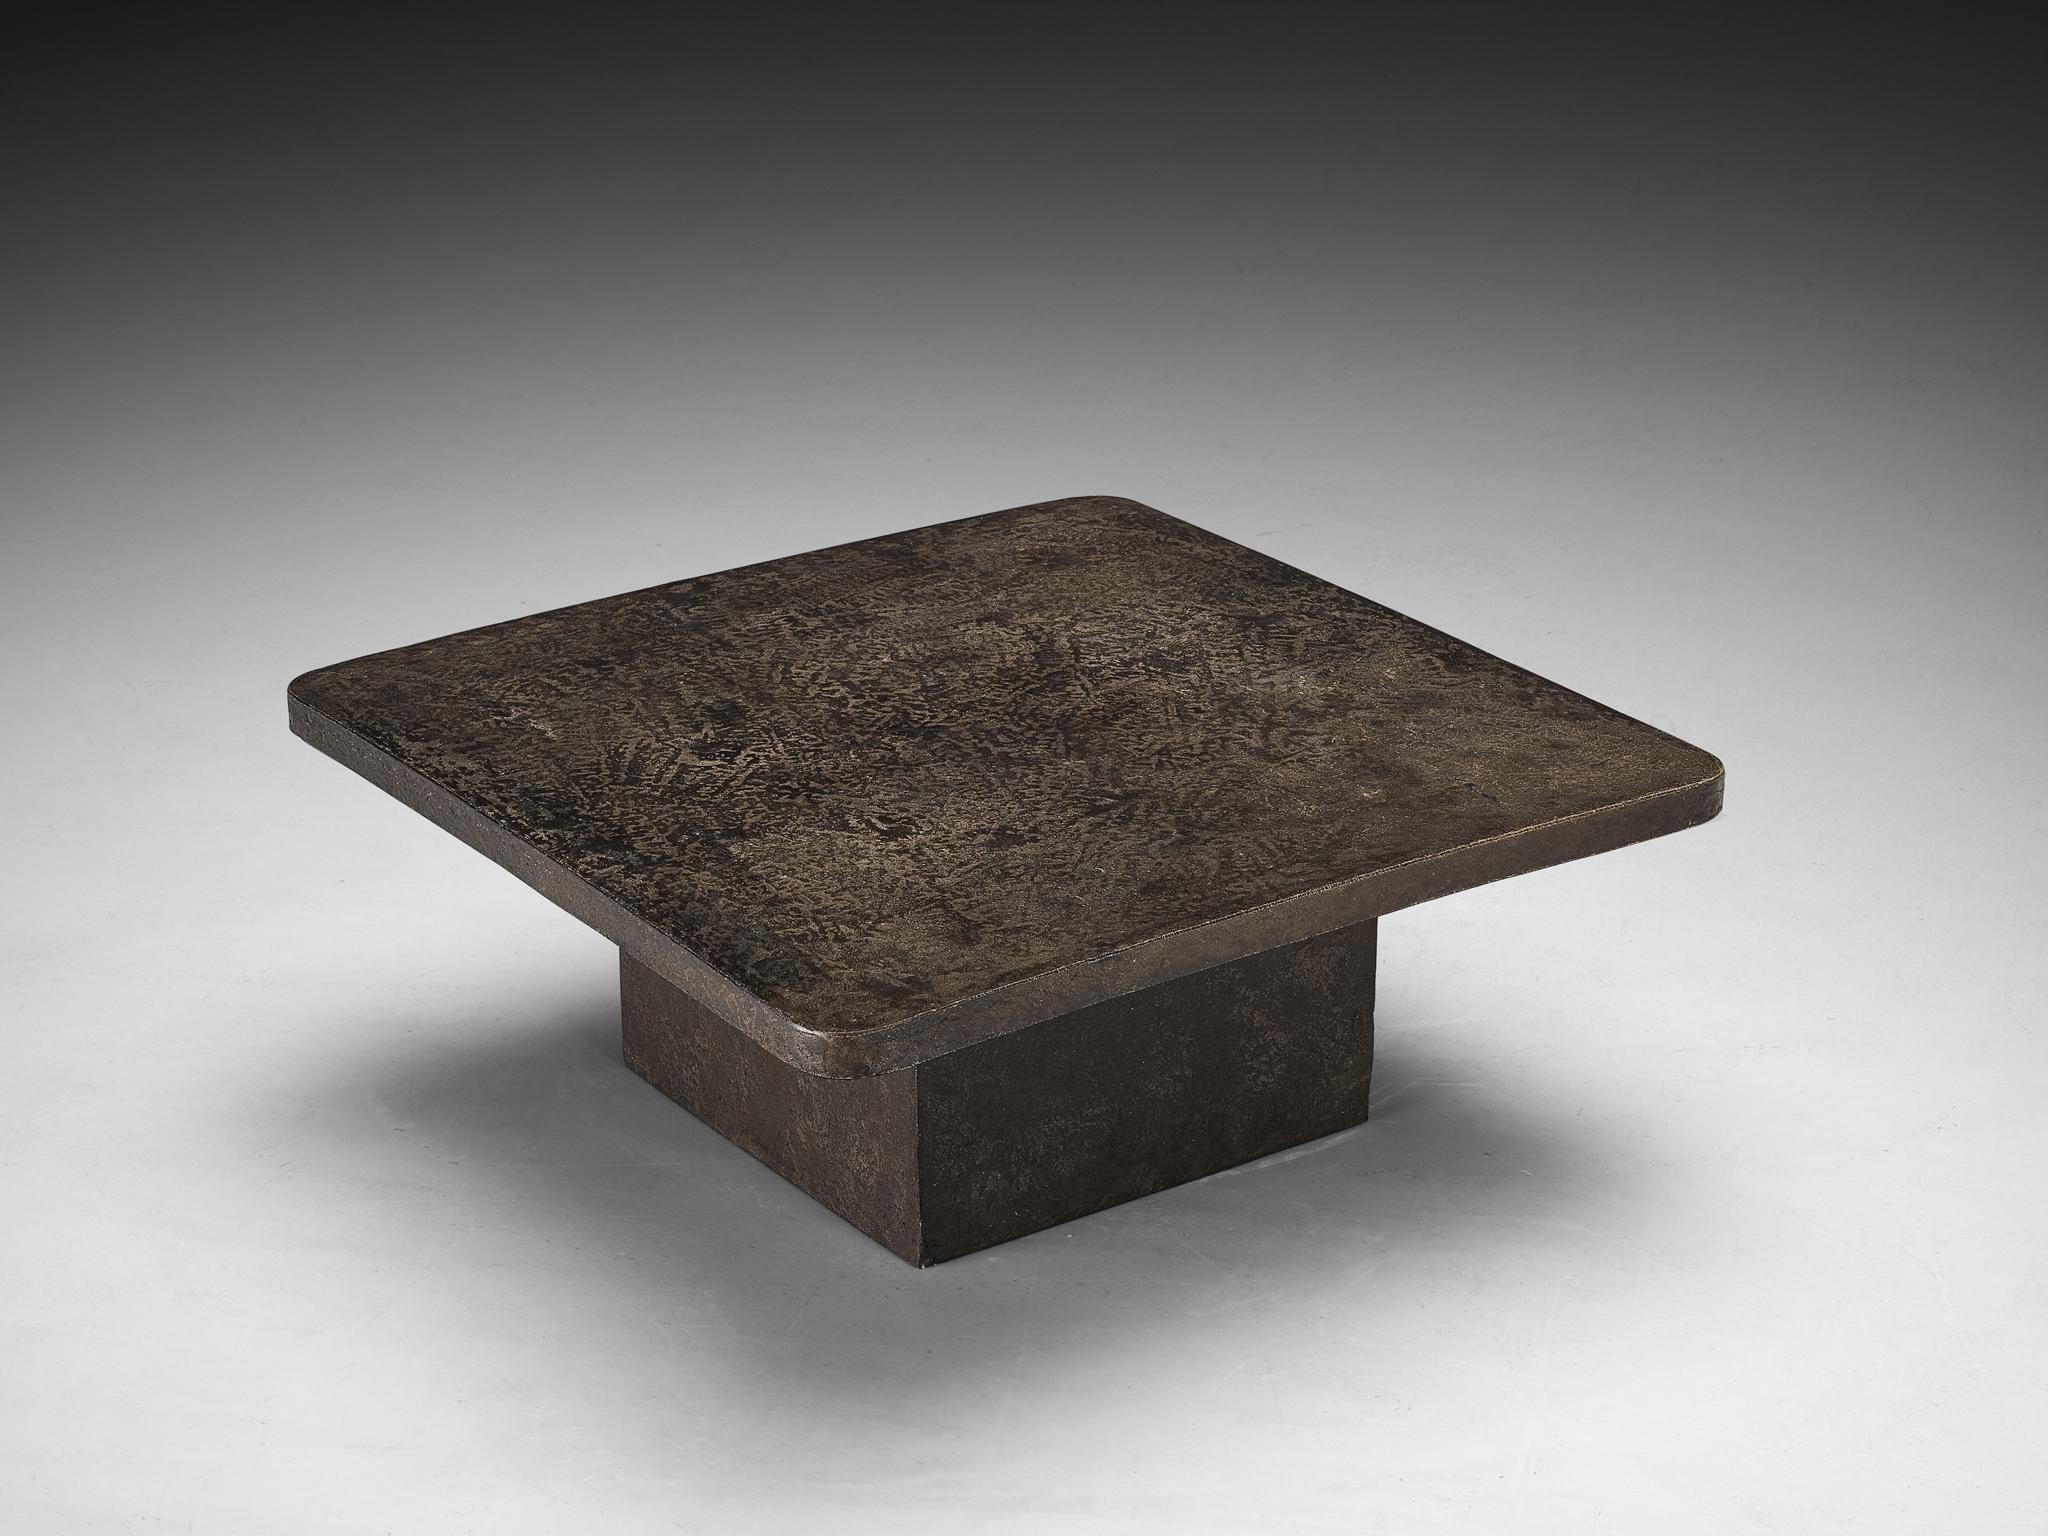 Cocktail or coffee table, resin, Europe, 1970s.

A brutalist square coffee table in resin made in the 1970s in Europe. This particular table has a very interesting partly matte finish in a stone look that has great detailing and a rich dark grey and